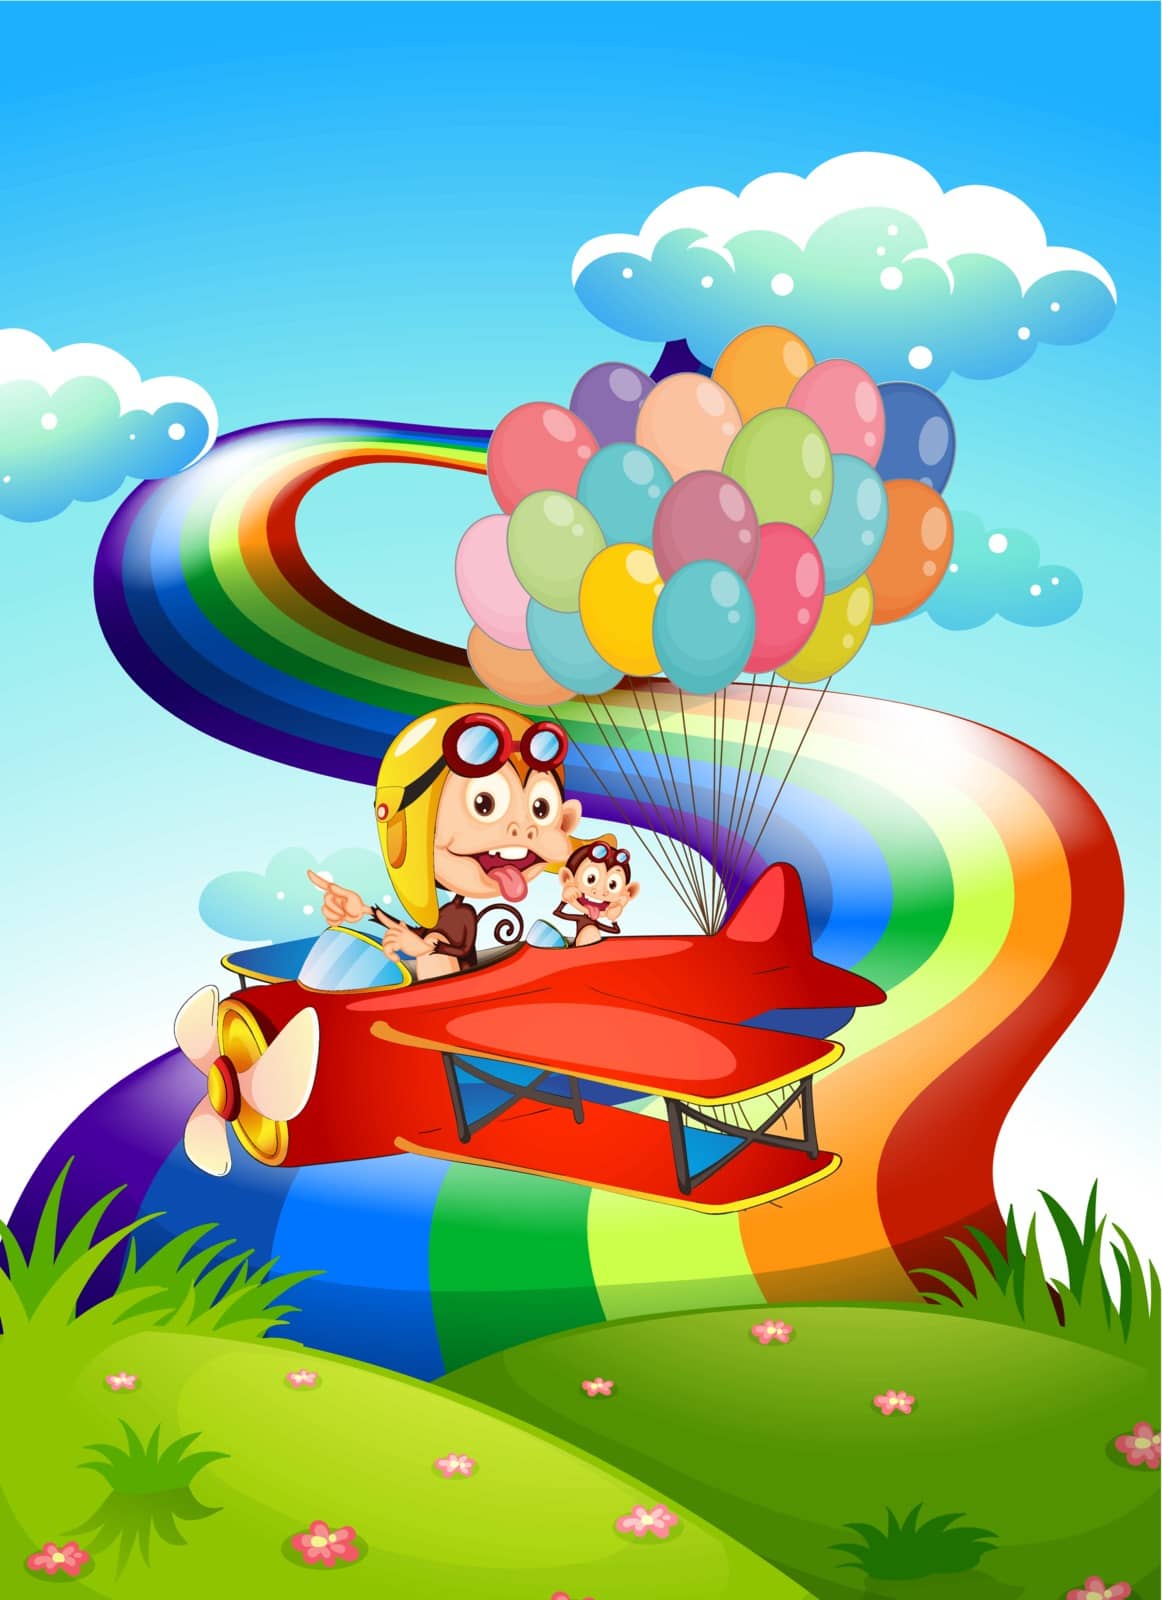 Illustration of the playful monkeys on a plane with balloons